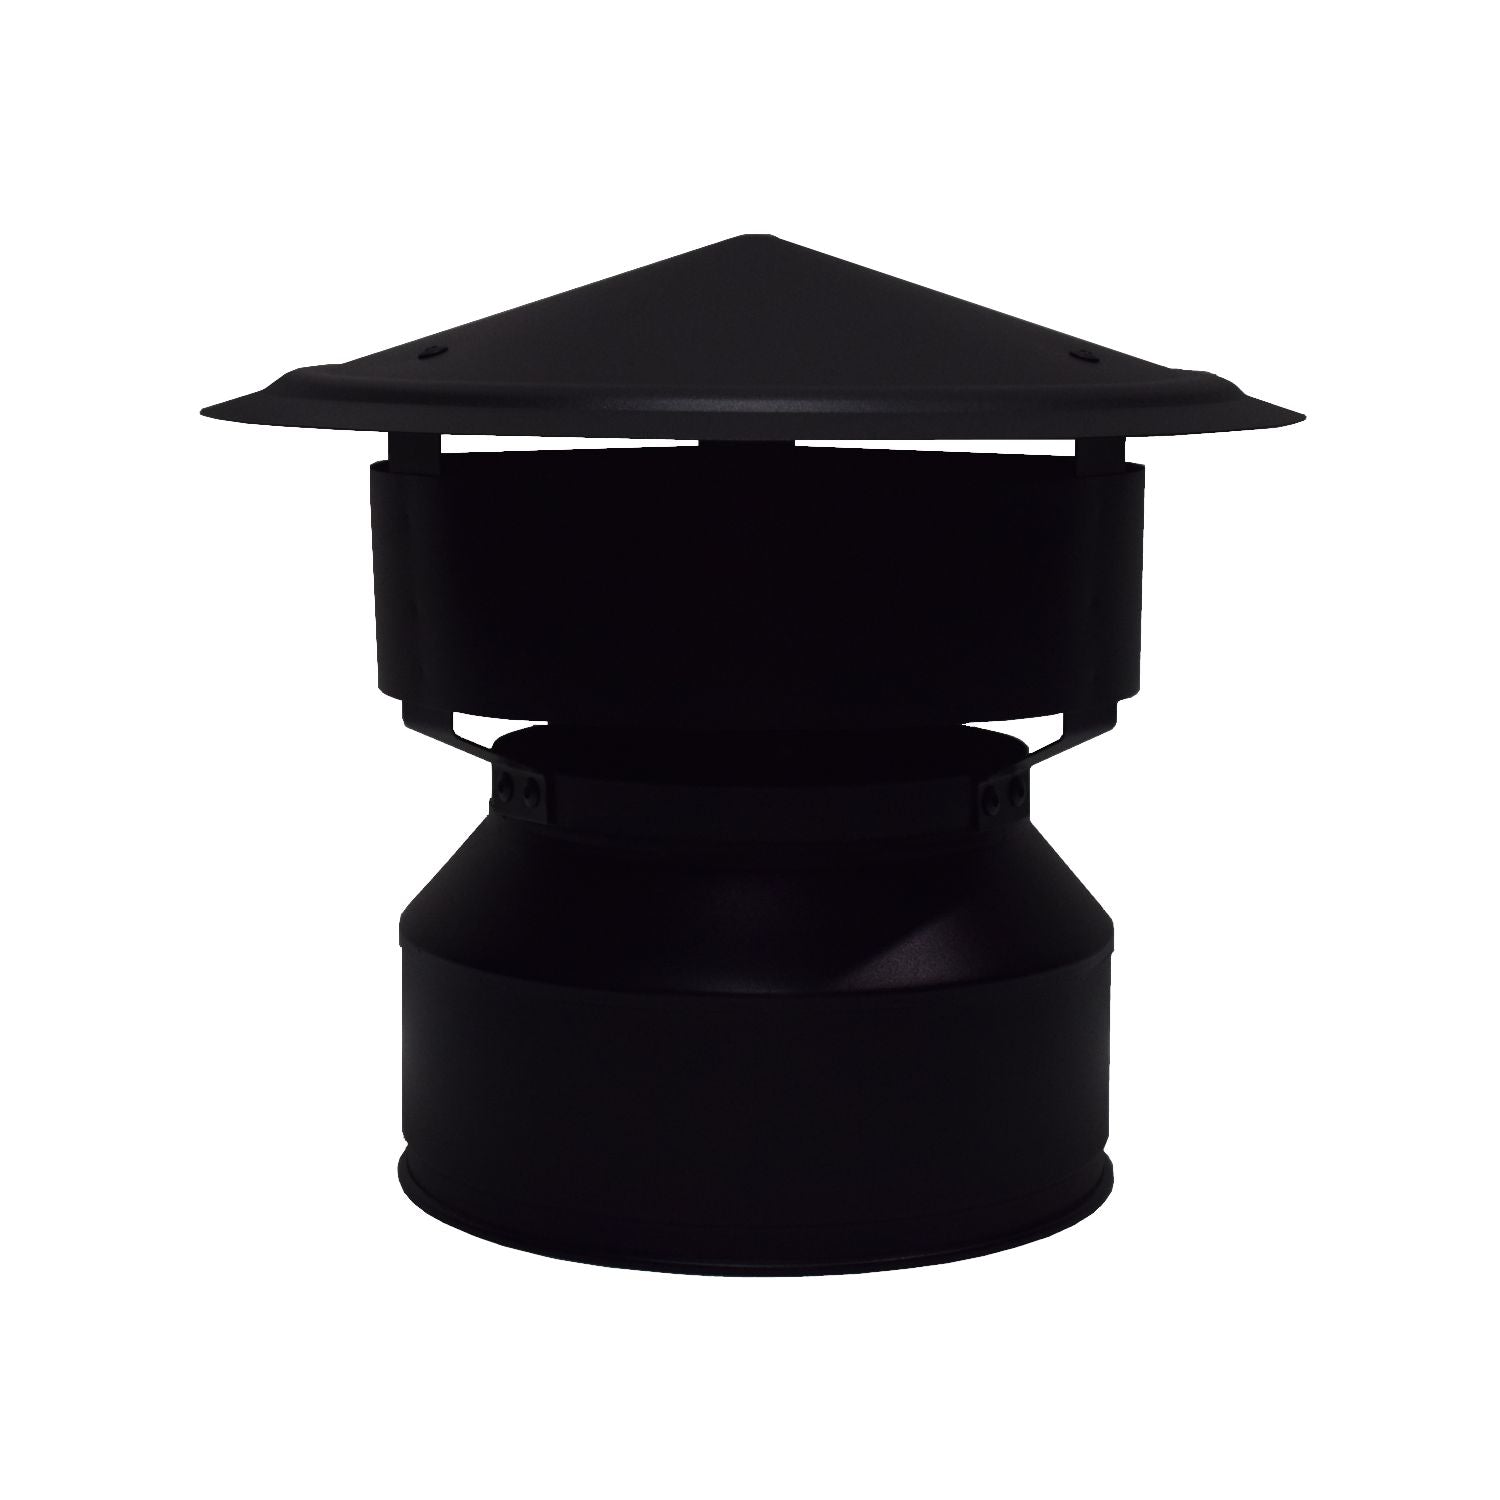 5" Fully Insulated Cone-Rain Cap With Locking Band - Black